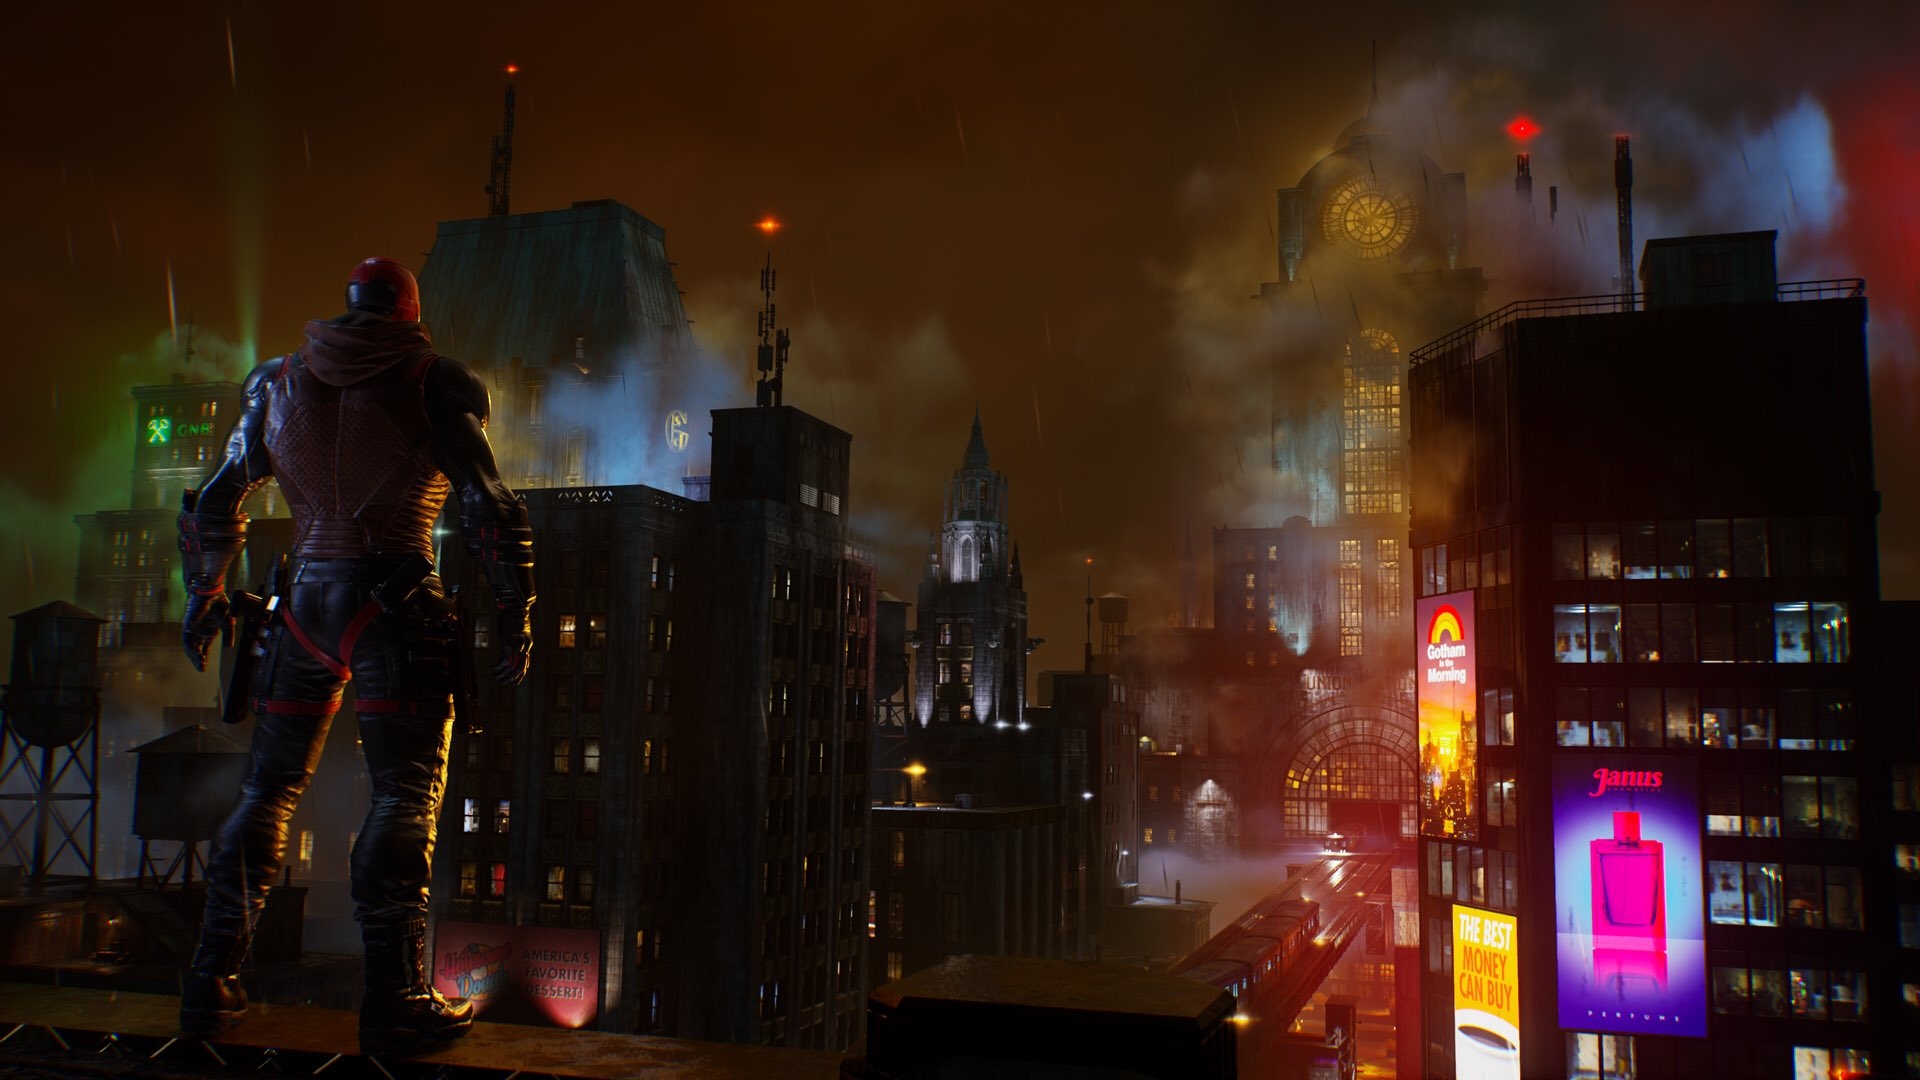 gotham knights ps4 release date